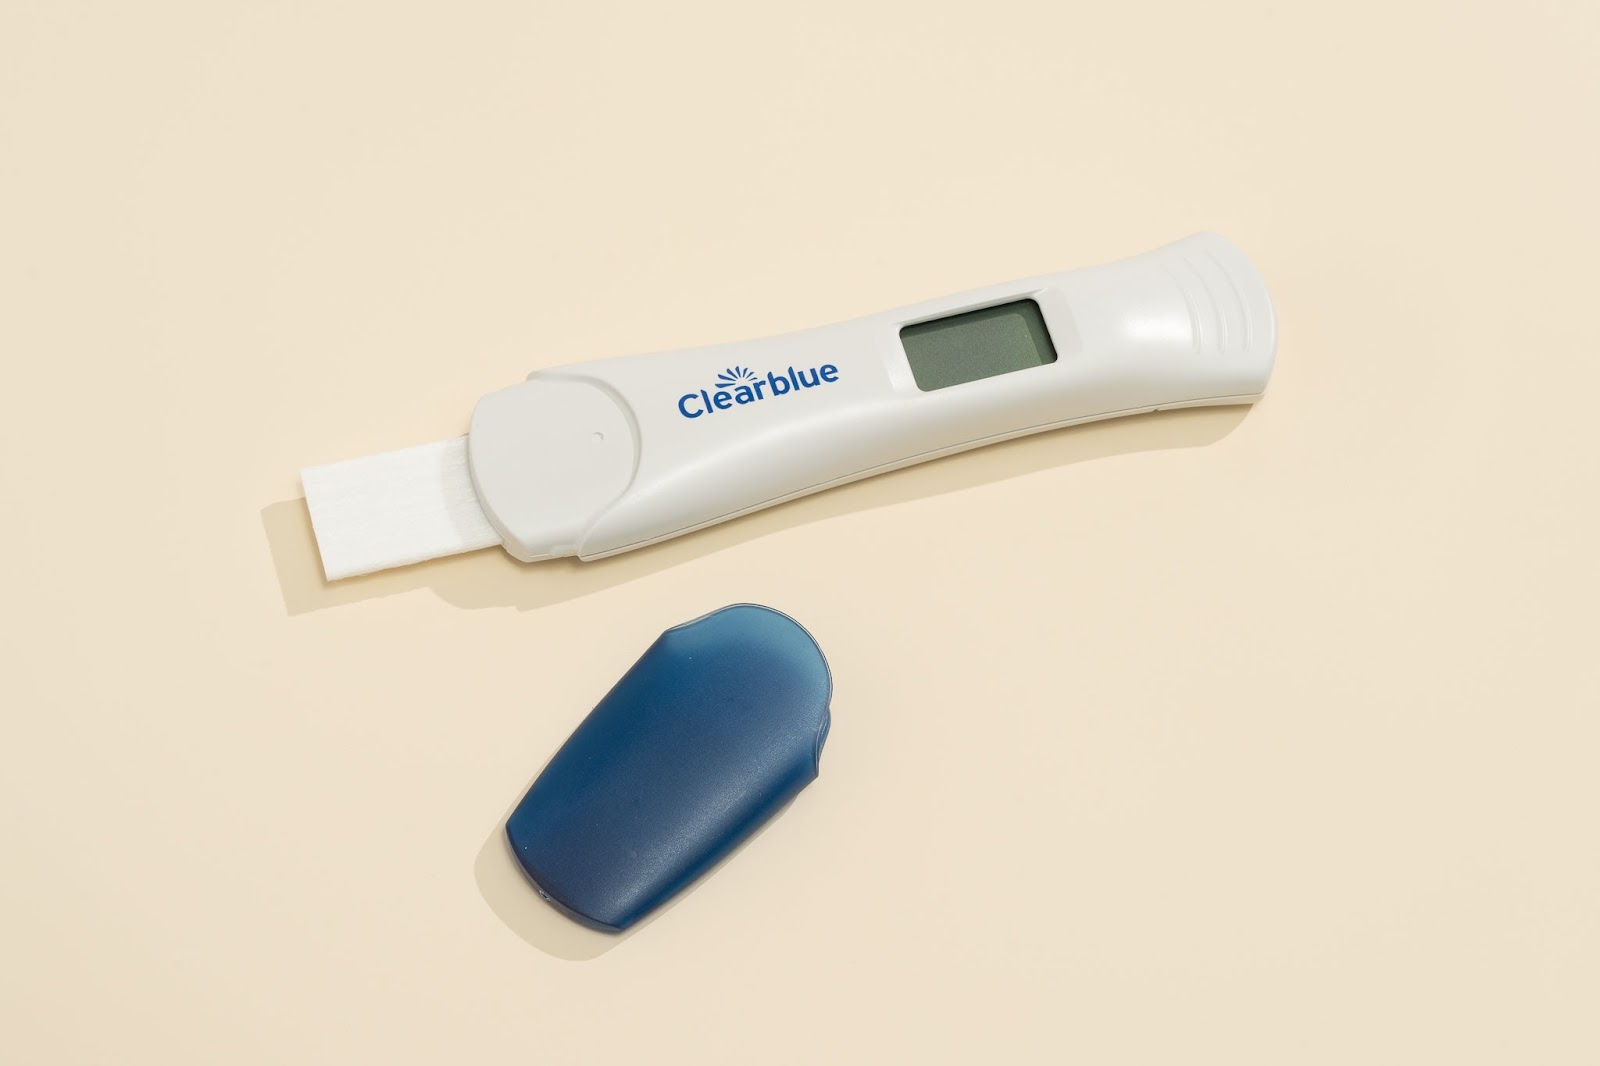 The Pros and Cons of Using Clear Blue Pregnancy Tests for Early Detection